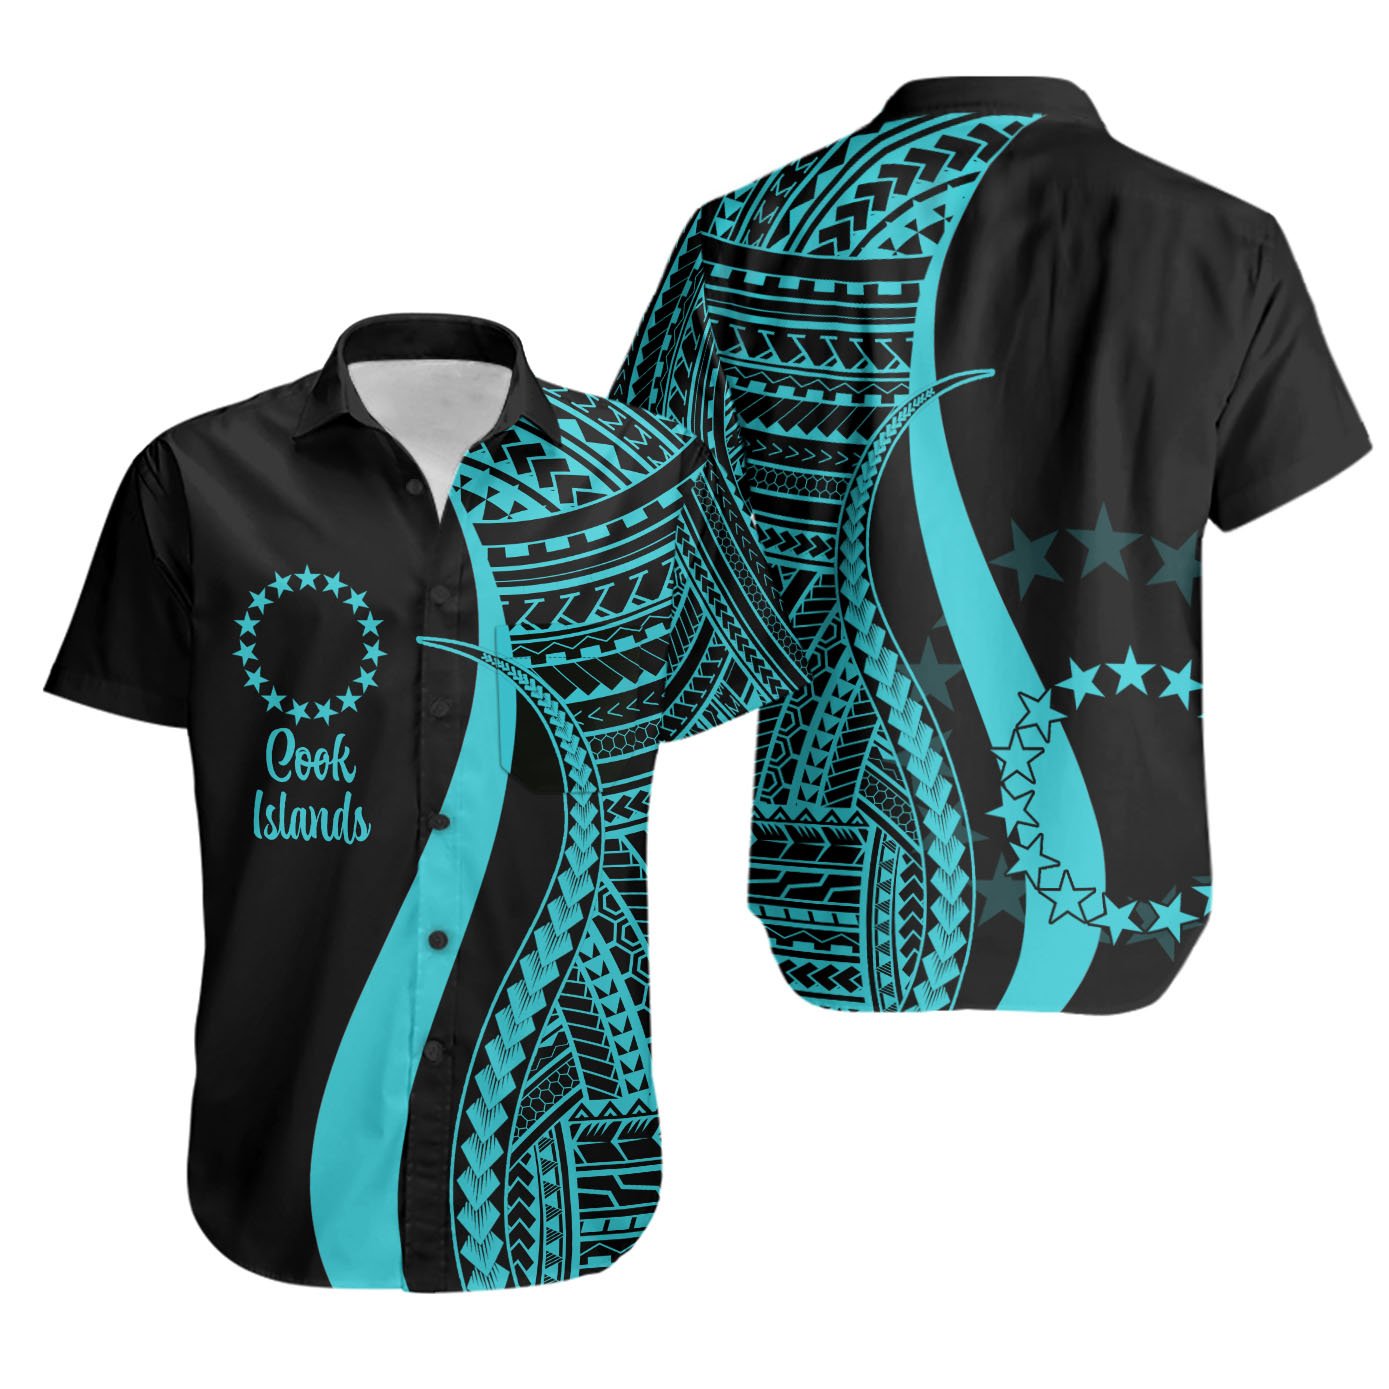 Cook Islands Short Sleeve Shirts - Turquoise Polynesian Tentacle Tribal Pattern Unisex Turquoise - Polynesian Pride